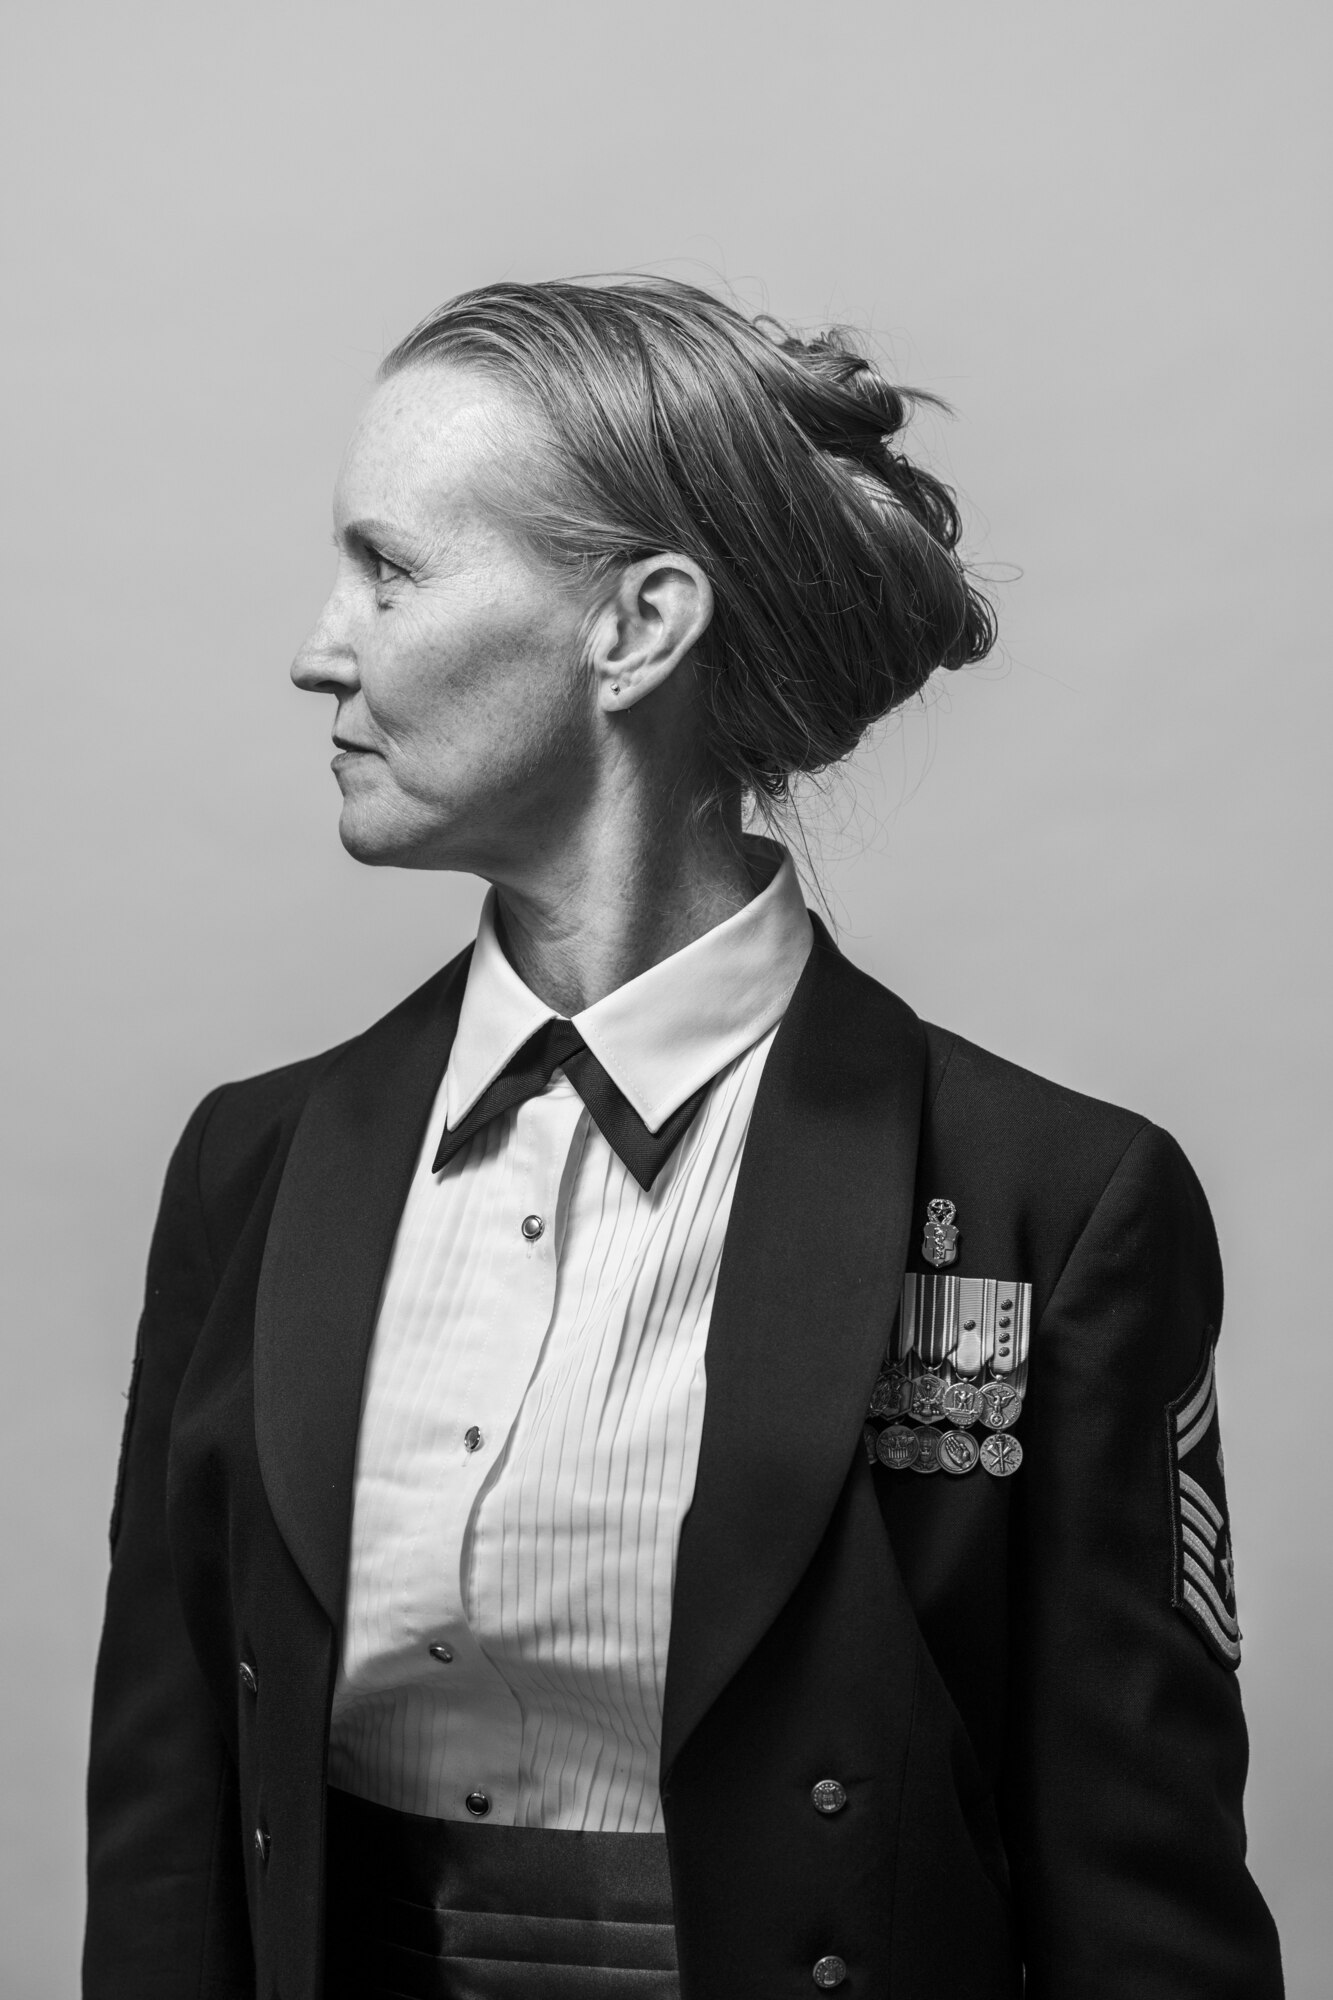 A woman stands in front of a white background wearing a dress uniform.